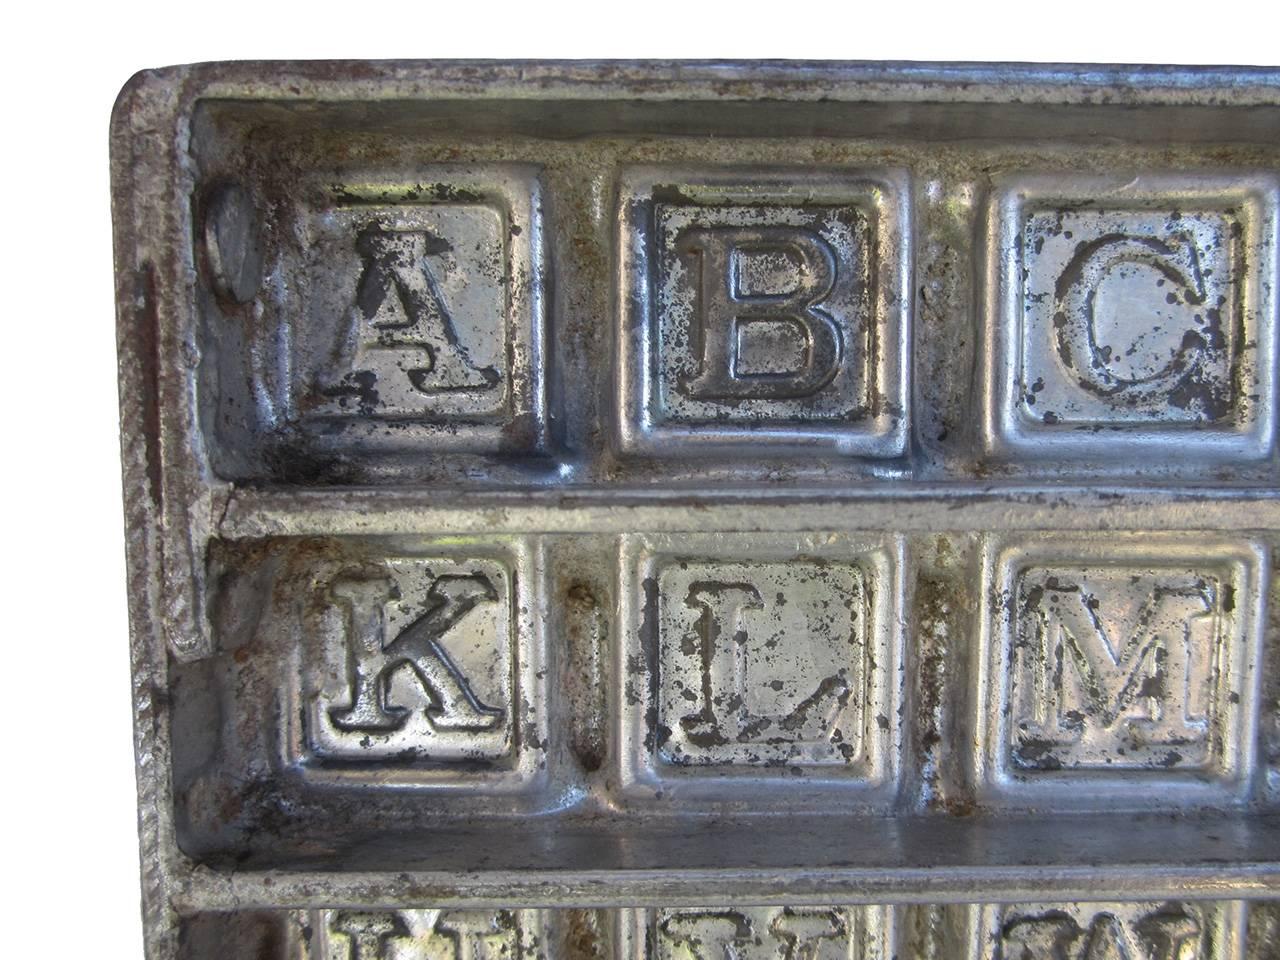 Rare early 1900s metal chocolate mold in alphabet and zero to nine numbers form, all in original and excellent condition.